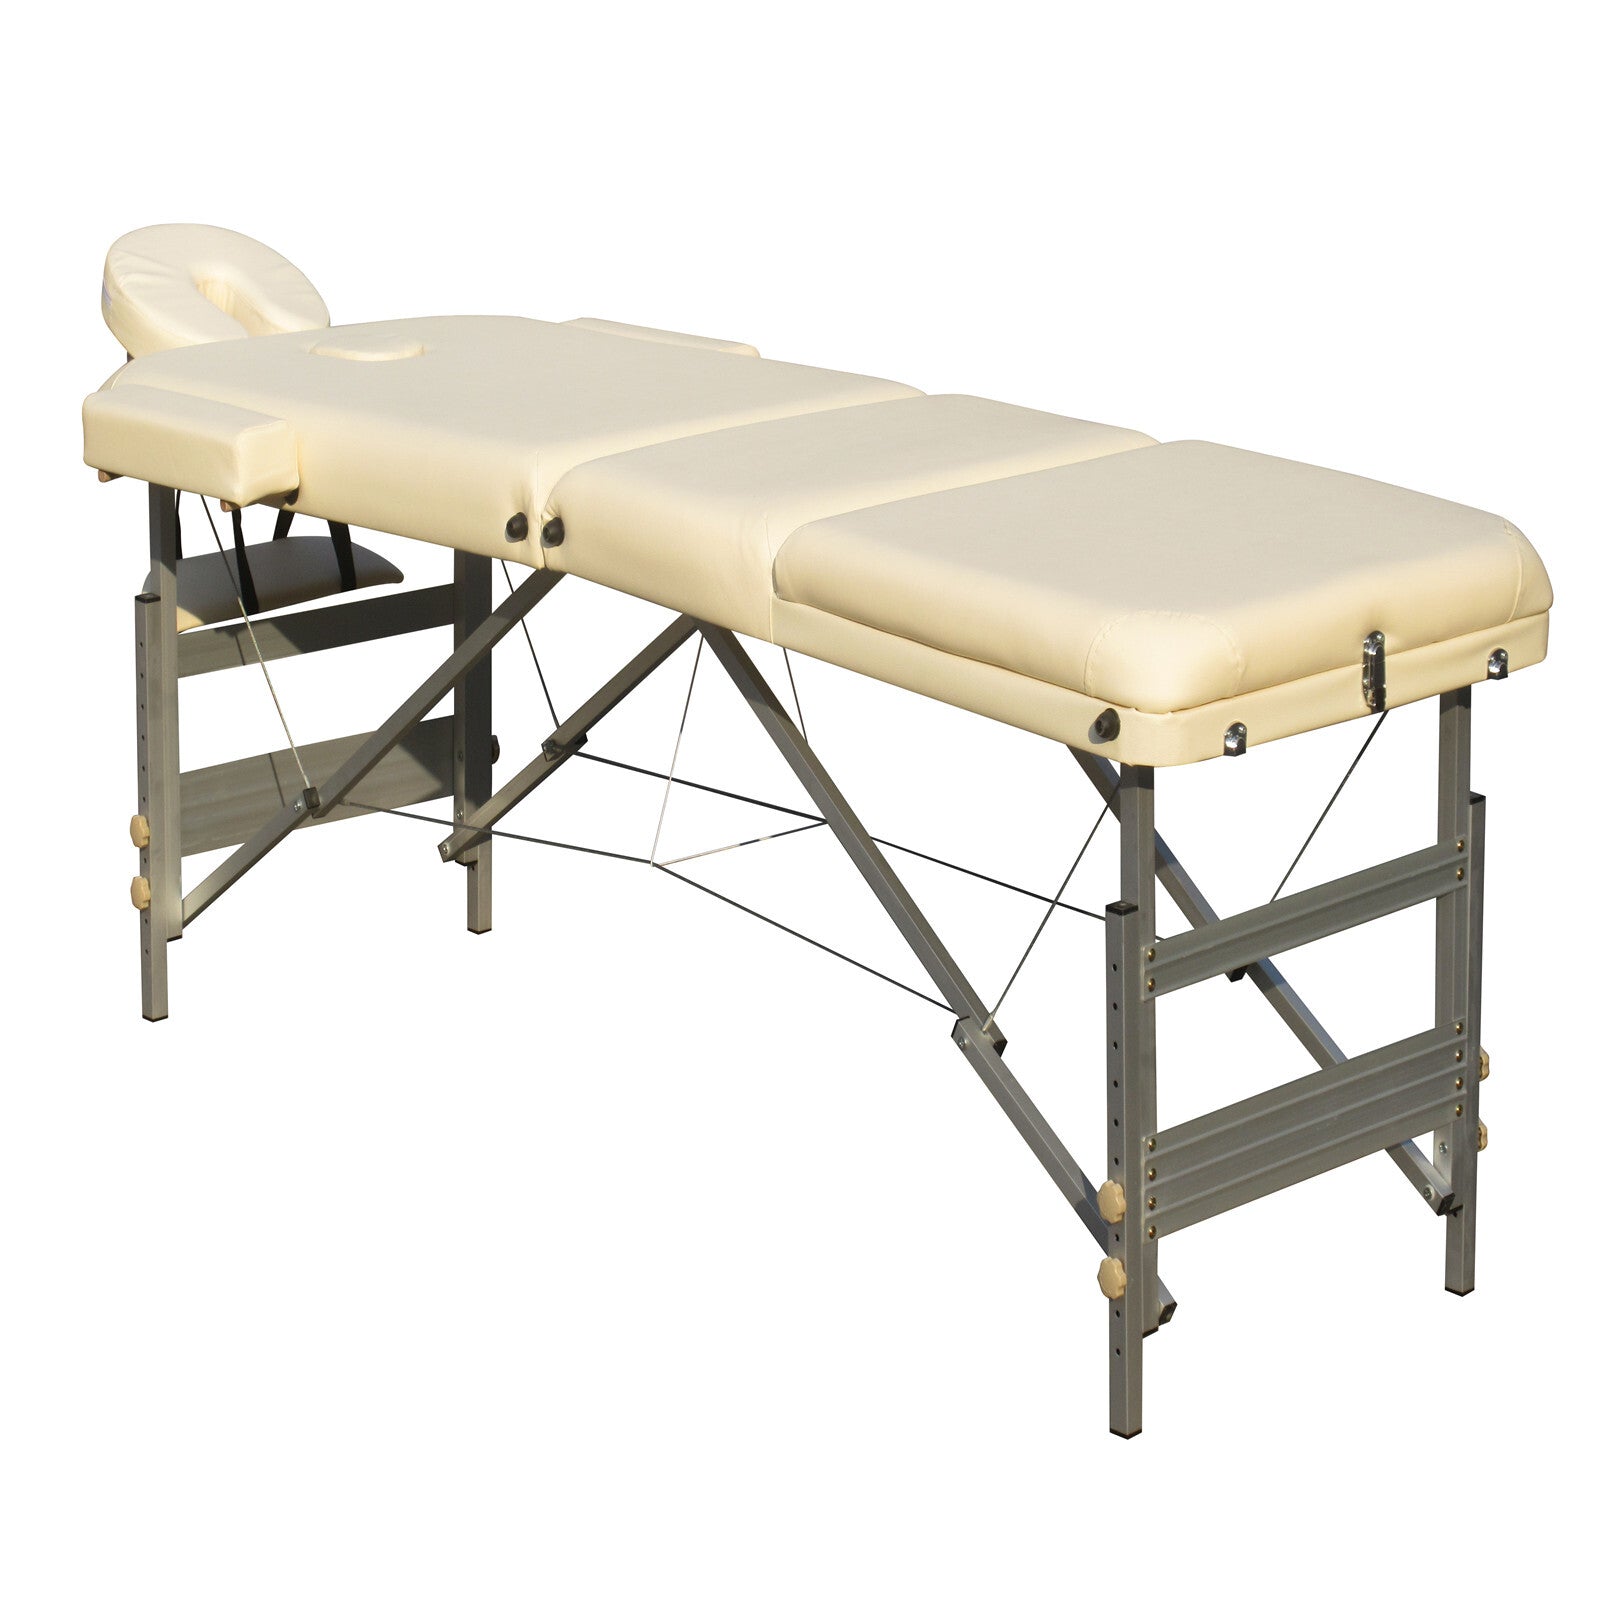 3 Fold Portable Aluminium Massage Table Massage Bed Beauty Therapy Beige - SILBERSHELL